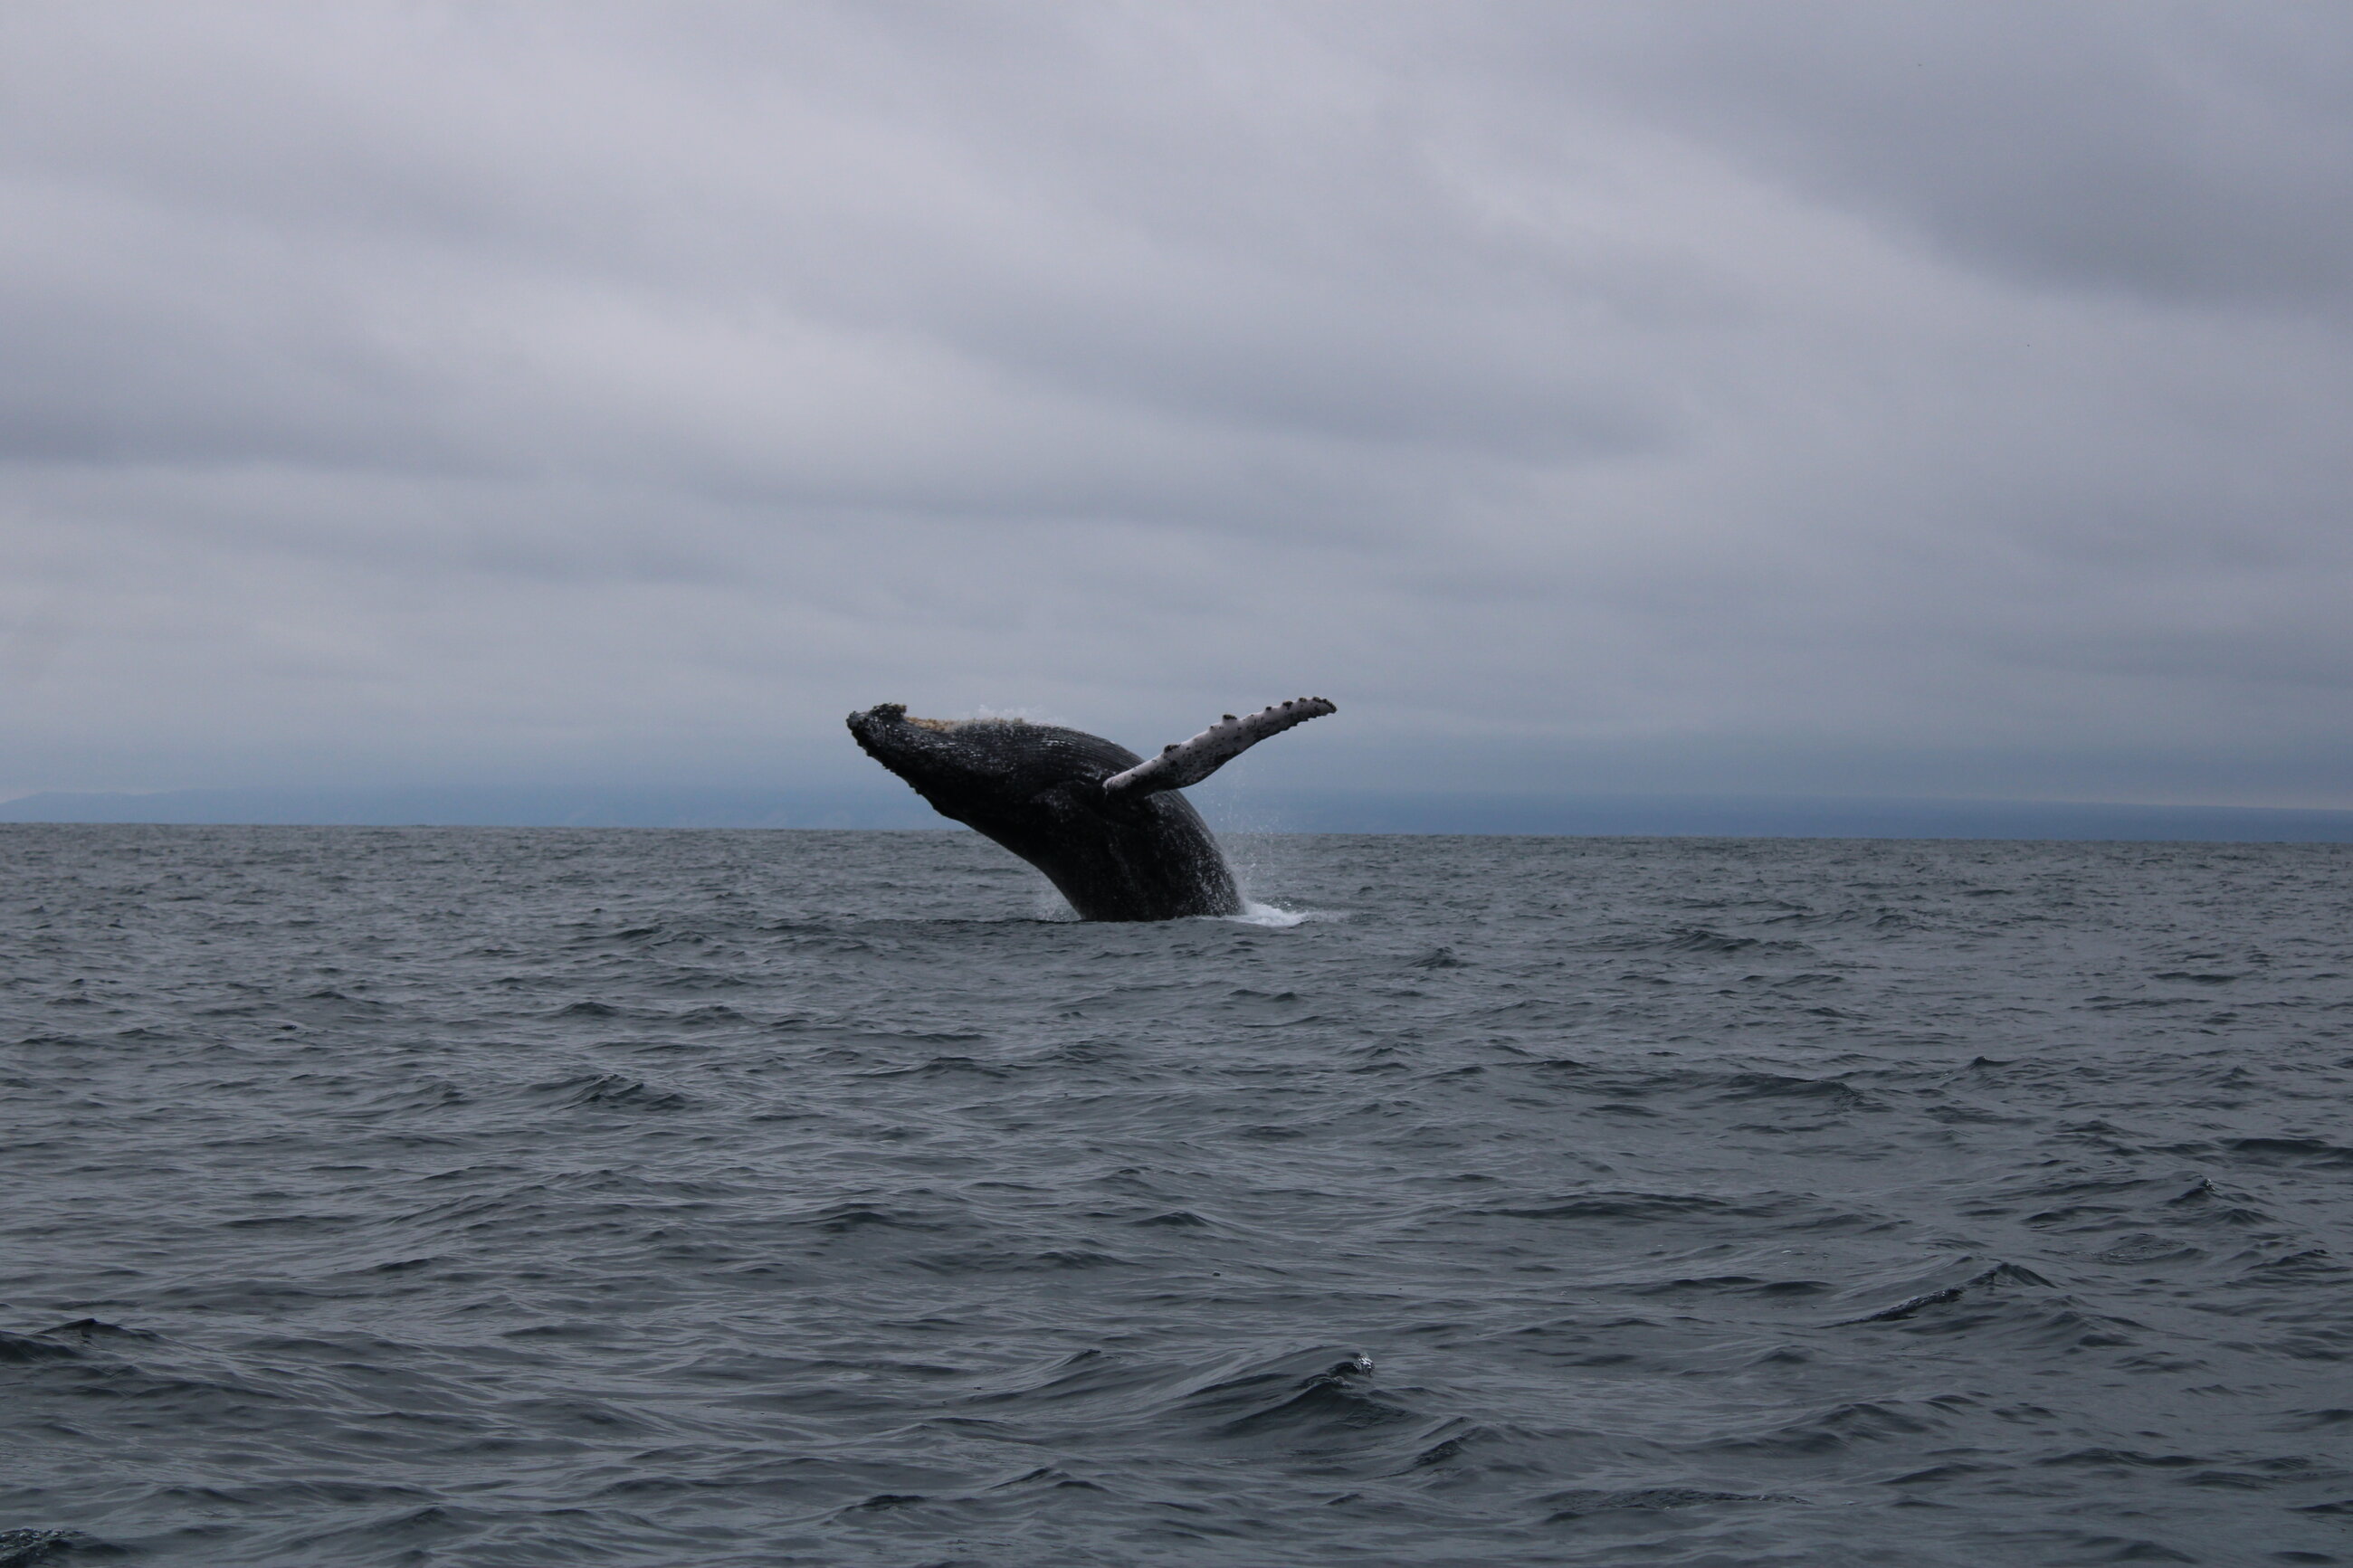 The humpback whales we saw!